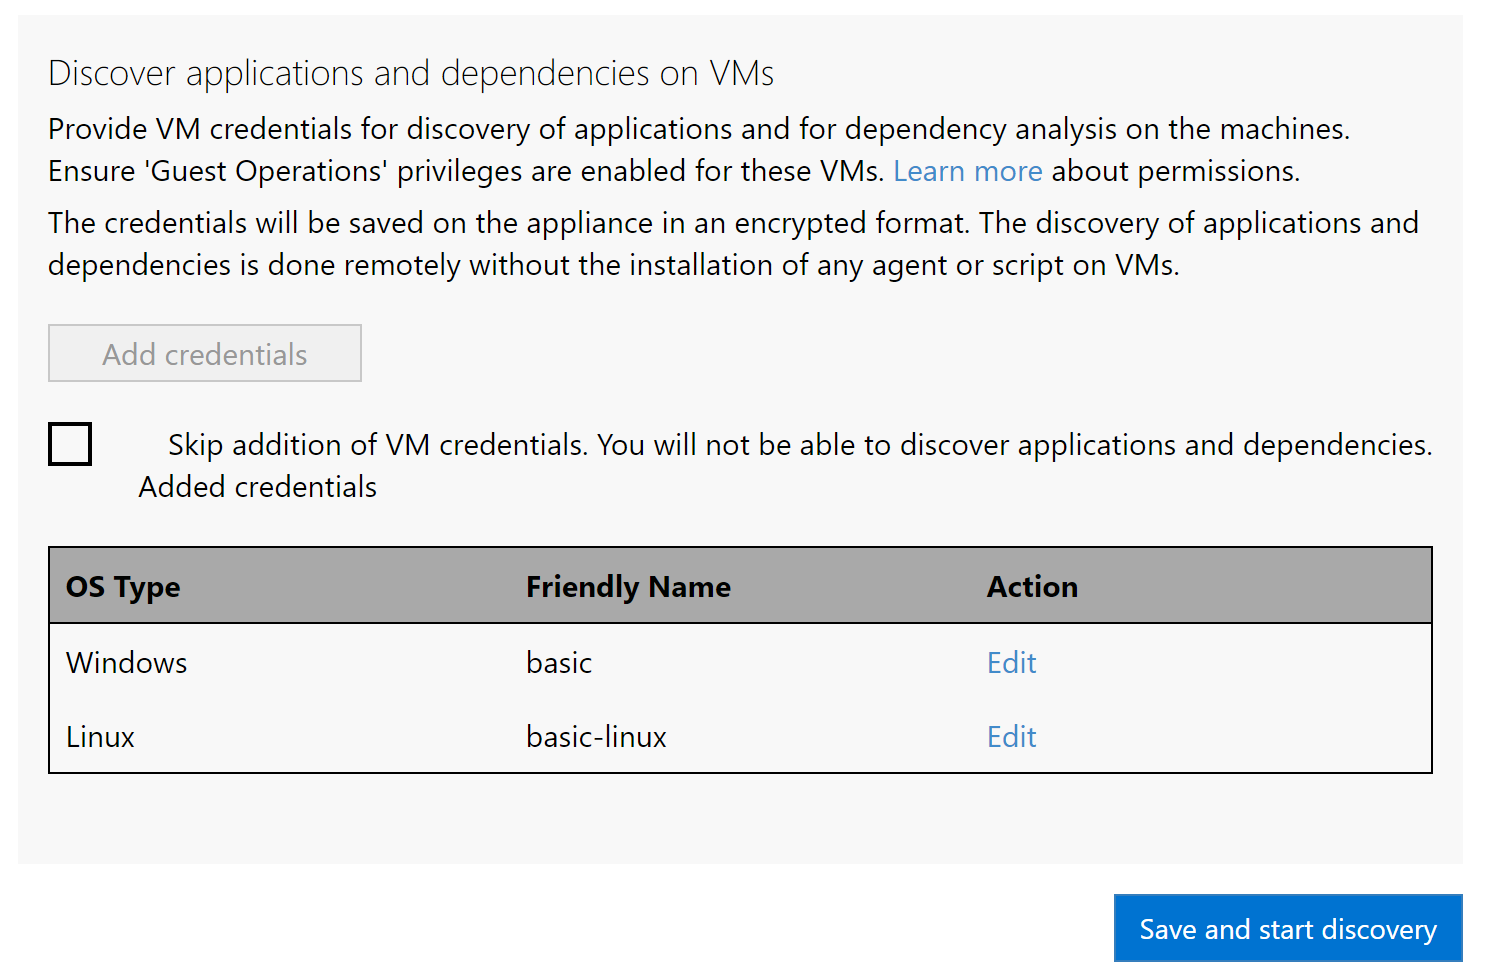 Screenshot of the section for discovering applications and dependencies on VMs.